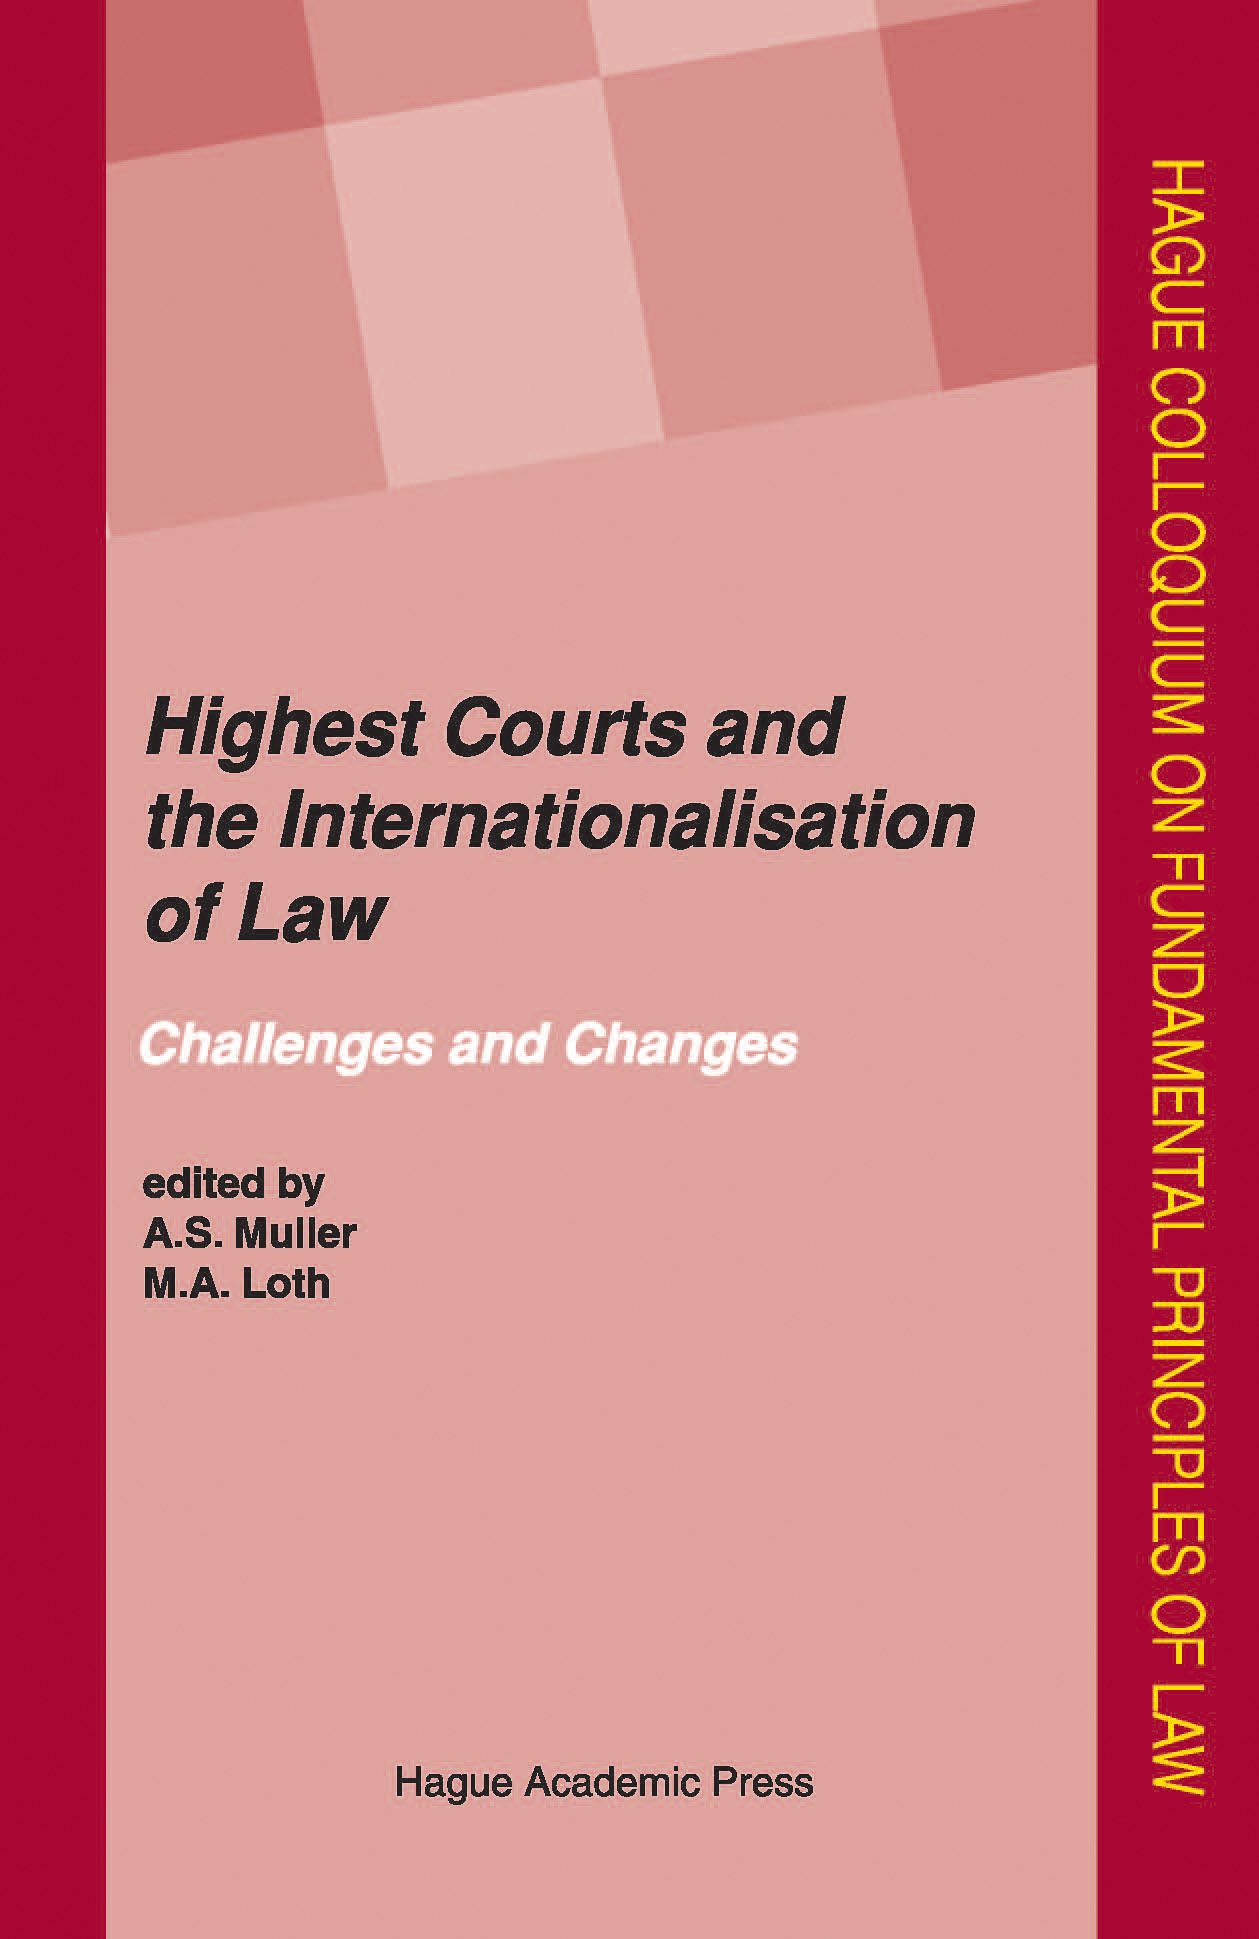 Highest Courts and the Internationalisation of Law